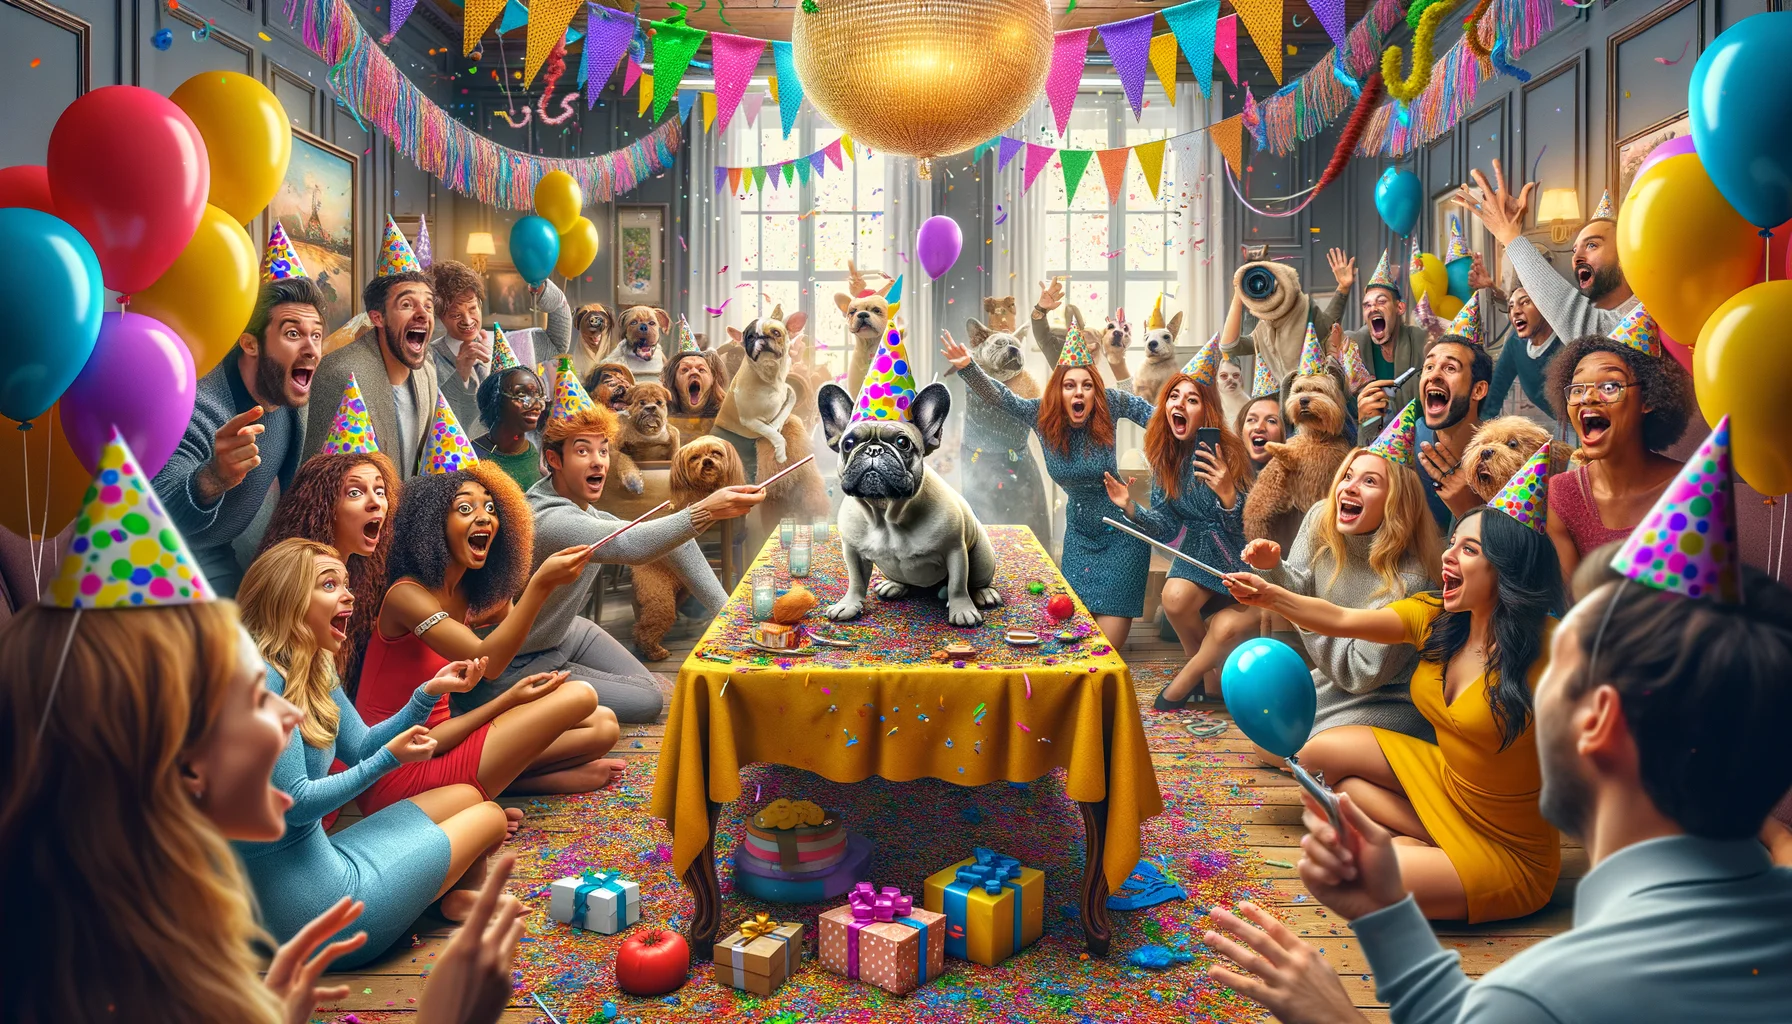 Imagine a hilariously funny scene that captures the spirit of a party. A brightly decorated room bursts with confetti, streamers, and balloons. In the center, a large table is filled with an array of party favors. There's an amusing mix-up where a curious French Bulldog, wearing a party hat, has climbed onto the table and is sniffing at a party blower thinking it's a treat. Around the room, captivated party-goers of diverse descents and genders wear amusing facial expressions, pointing and laughing at the adorable and humorous situation.